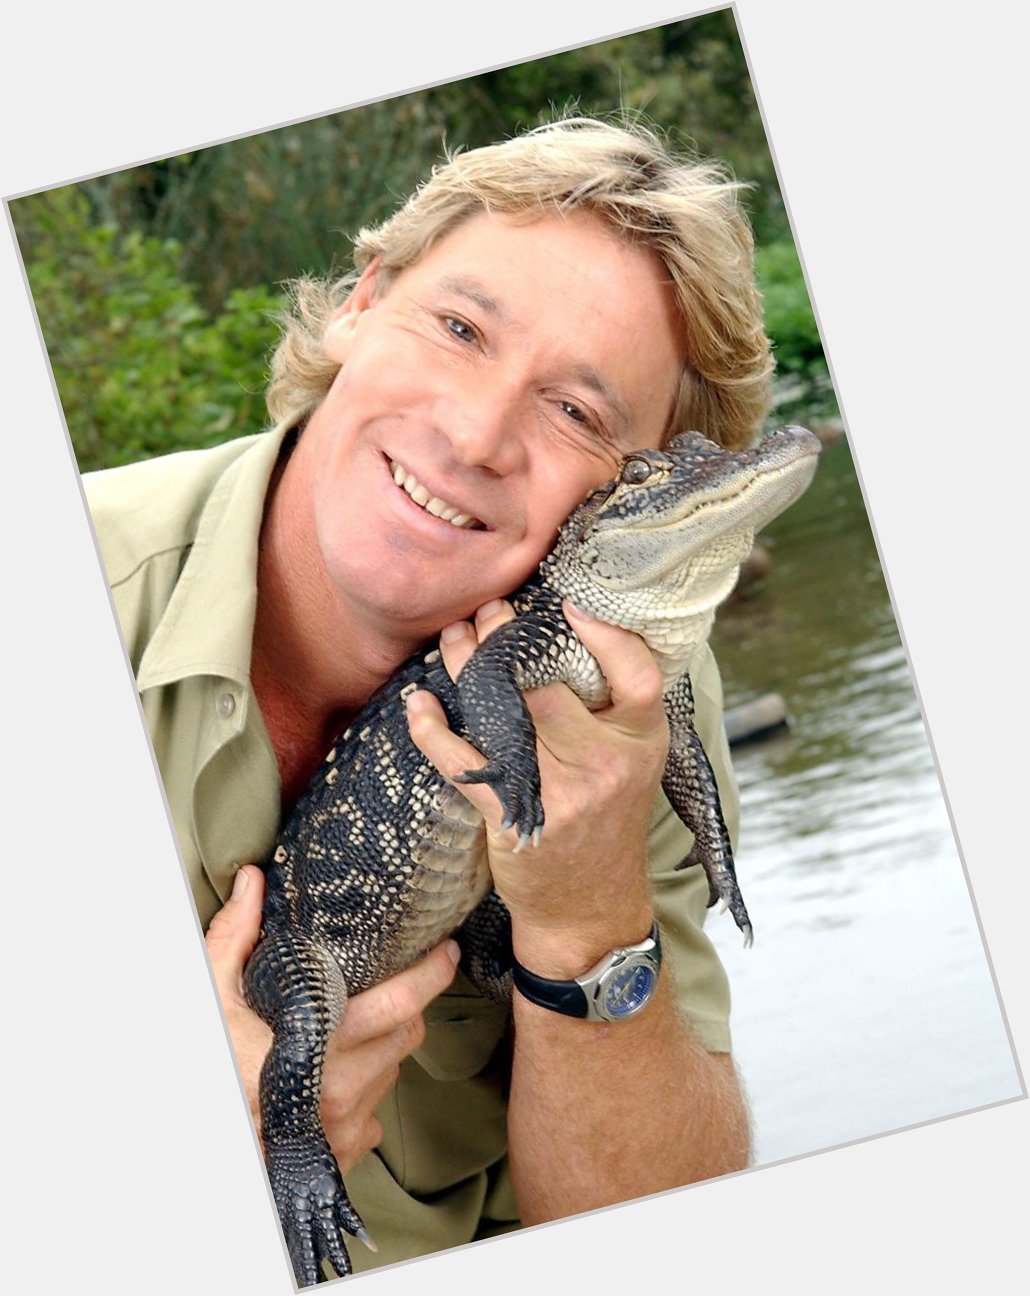 Happy birthday to the one and only Steve Irwin 